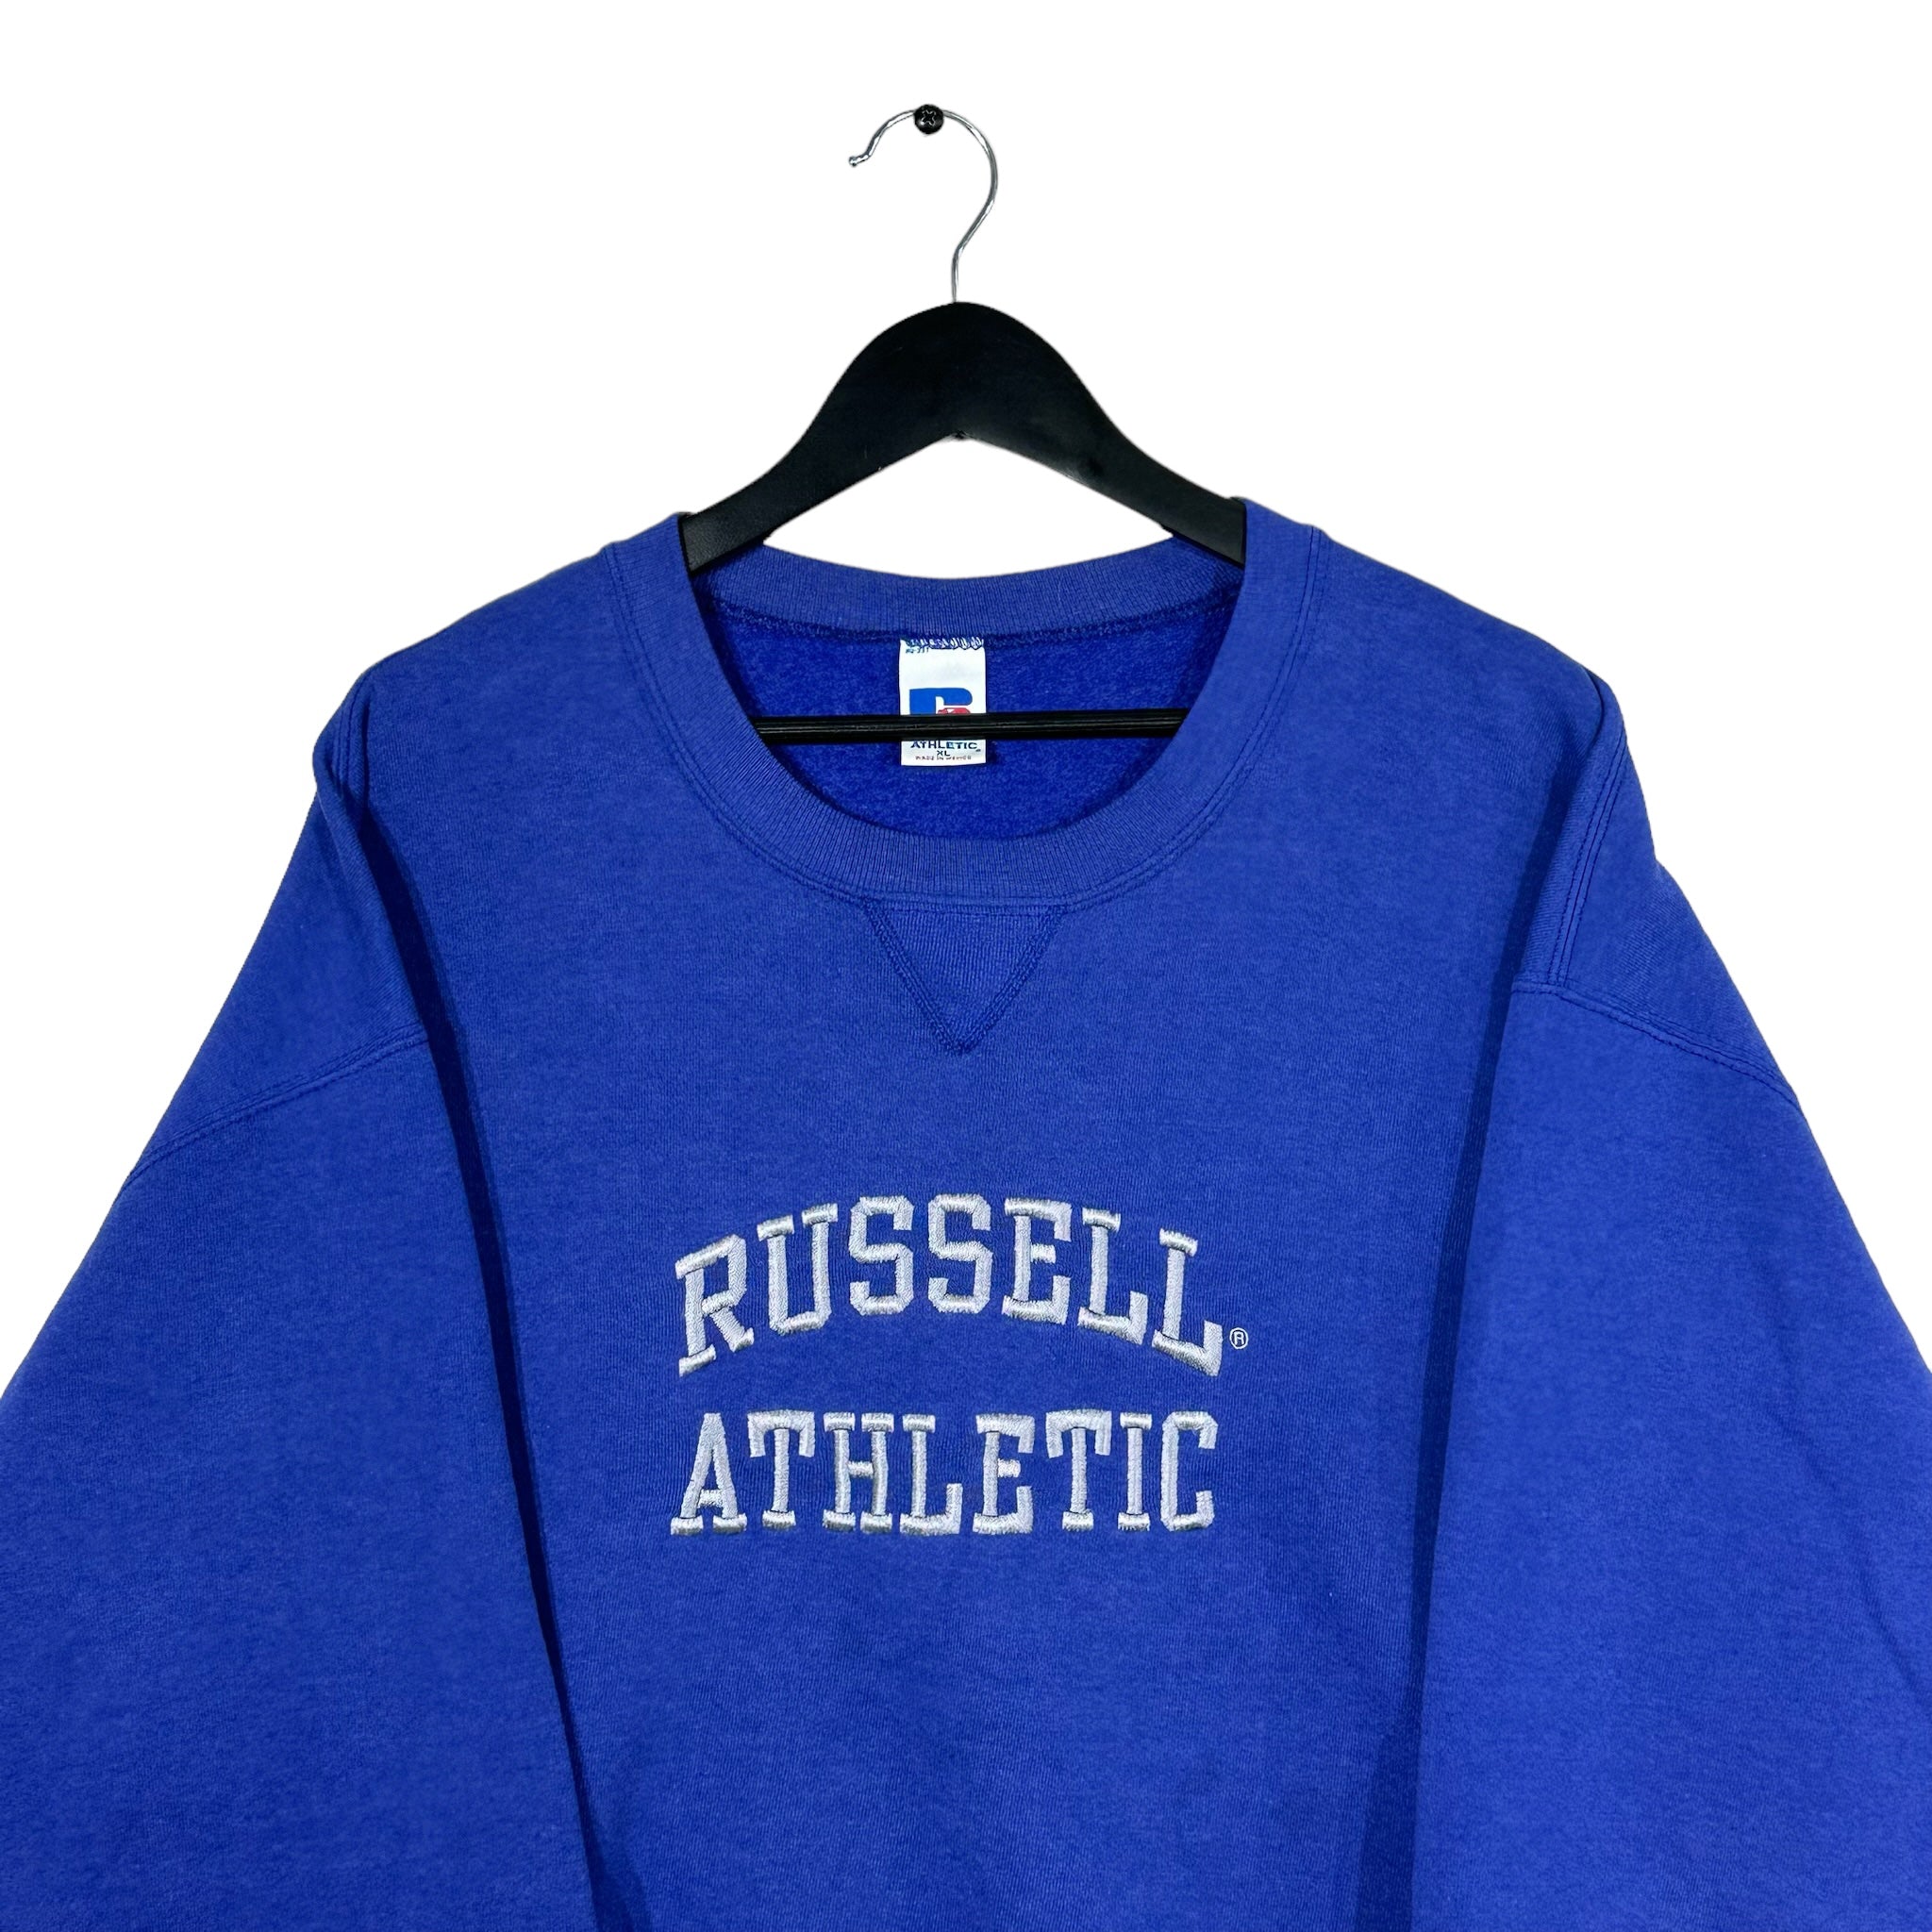 Vintage Russell Athletic Spell Out Crewneck 90s